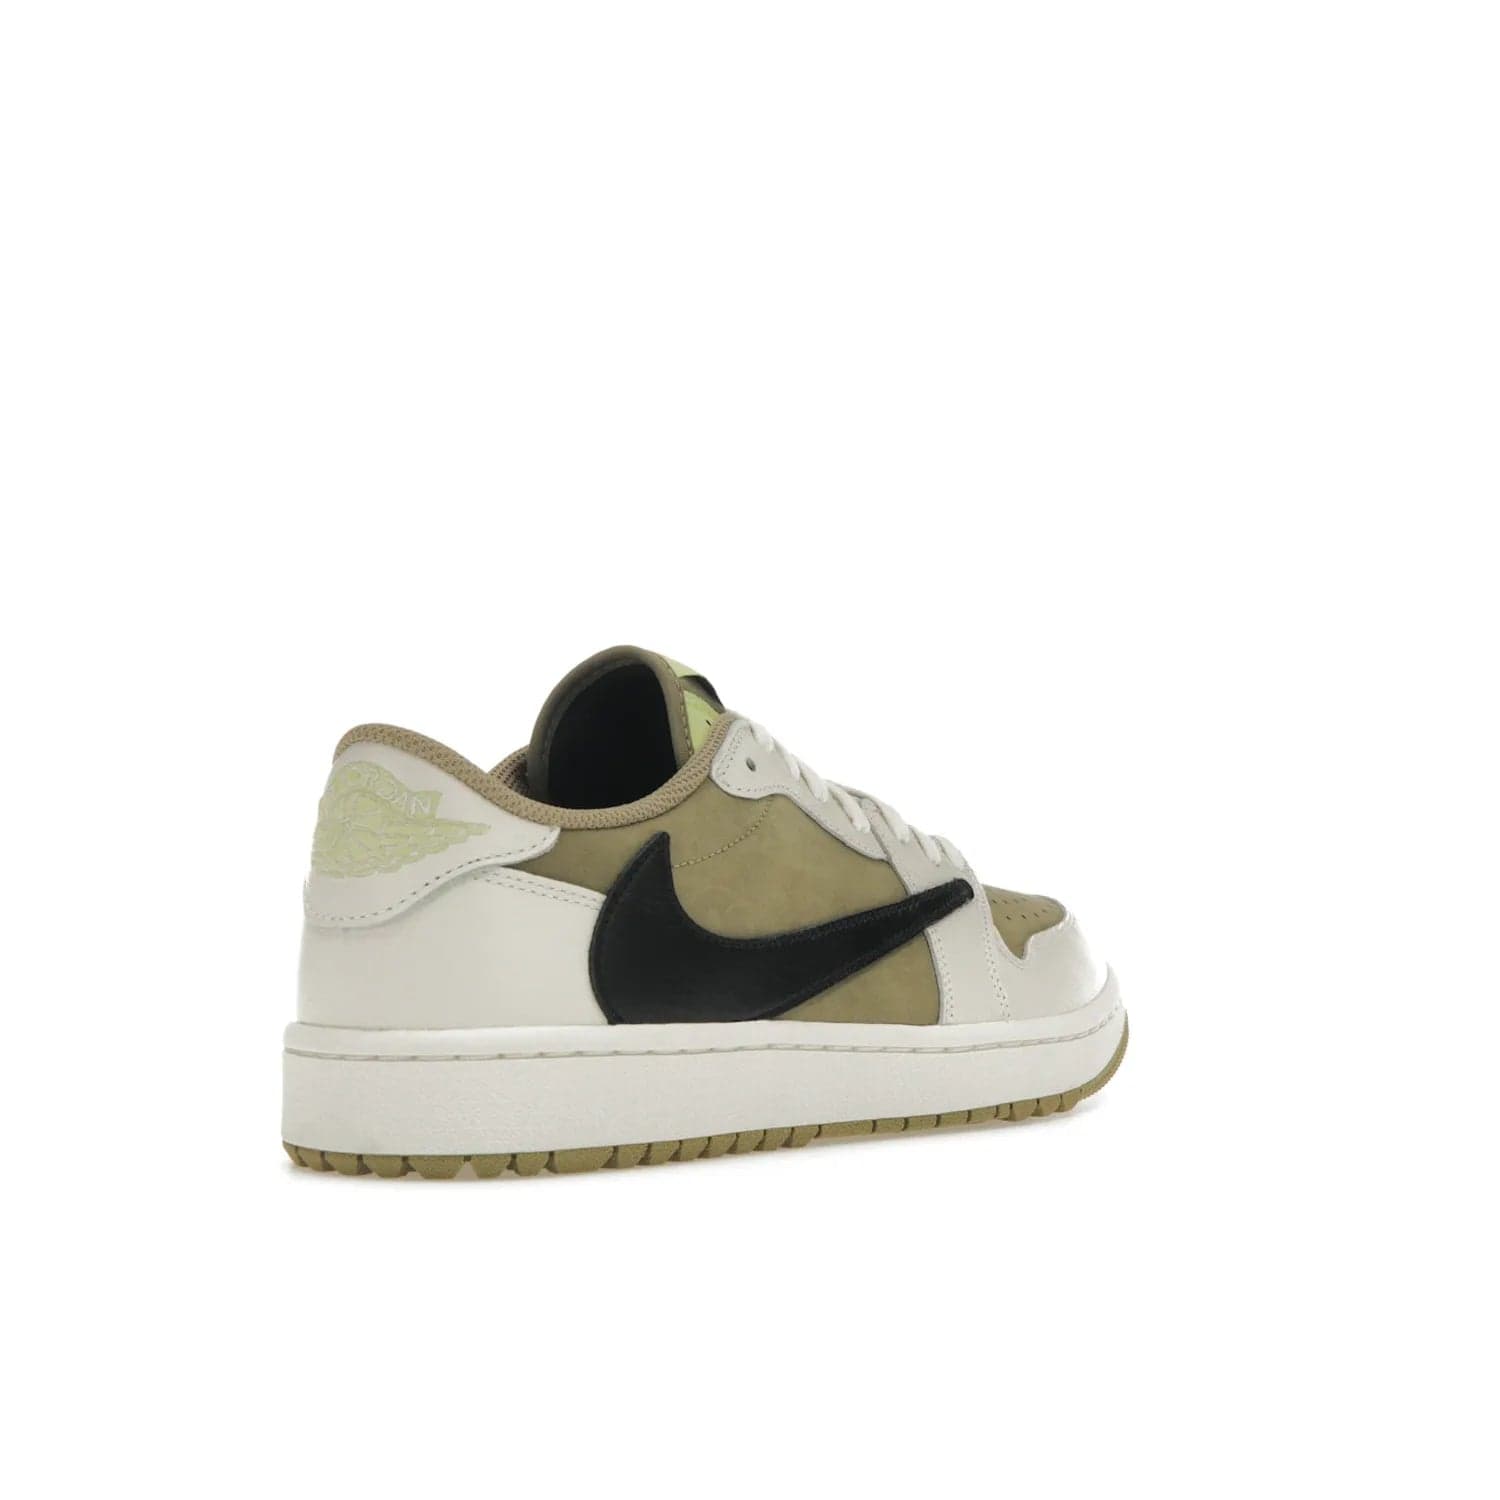 Jordan 1 Retro Low Golf Travis Scott Neutral Olive - Image 32 - Only at www.BallersClubKickz.com - Explore the unique Jordan 1 Retro Low Golf Travis Scott Neutral Olive, an olive-green sneaker collaboration between the iconic Jordan Brand and music royalty, Travis Scott. This special pair is tailored for the golf course with altered traction, hardened rubber, and a sleek style perfect for everyday wear. Get your pair and impress the crowd with its signature earth tones.